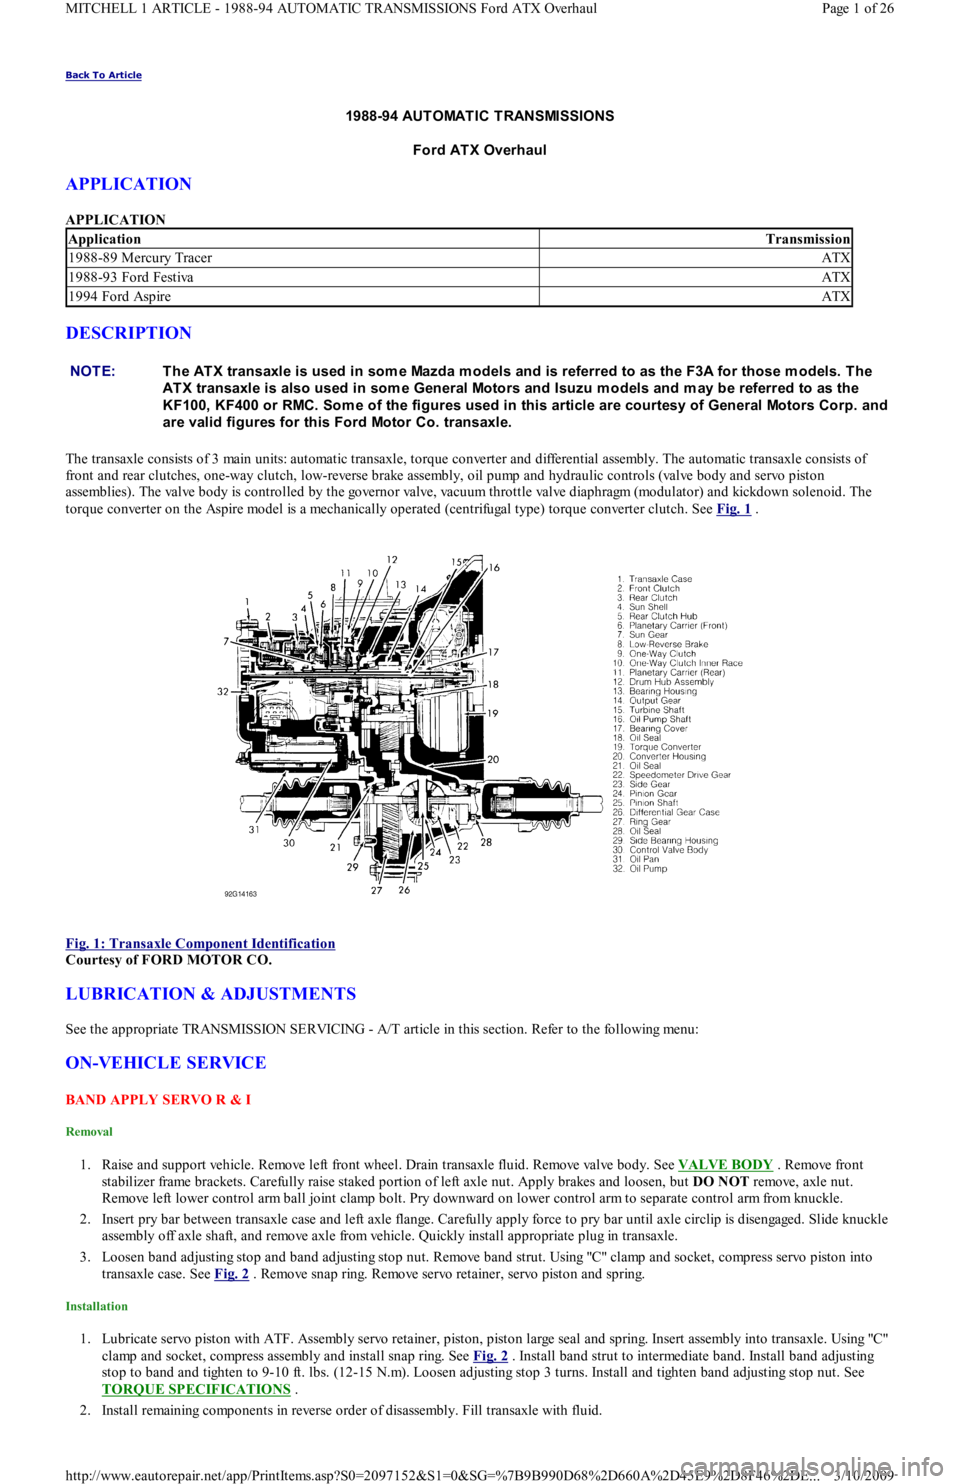 FORD FESTIVA 1991  Service Manual Back To Article 
1988-94 AUT OMAT IC T RANSMISSIONS
Ford ATX Overhaul 
APPLICATION 
APPLICATION 
DESCRIPTION 
The transaxle consists of 3 main units: automatic transaxle, torque converter and differen